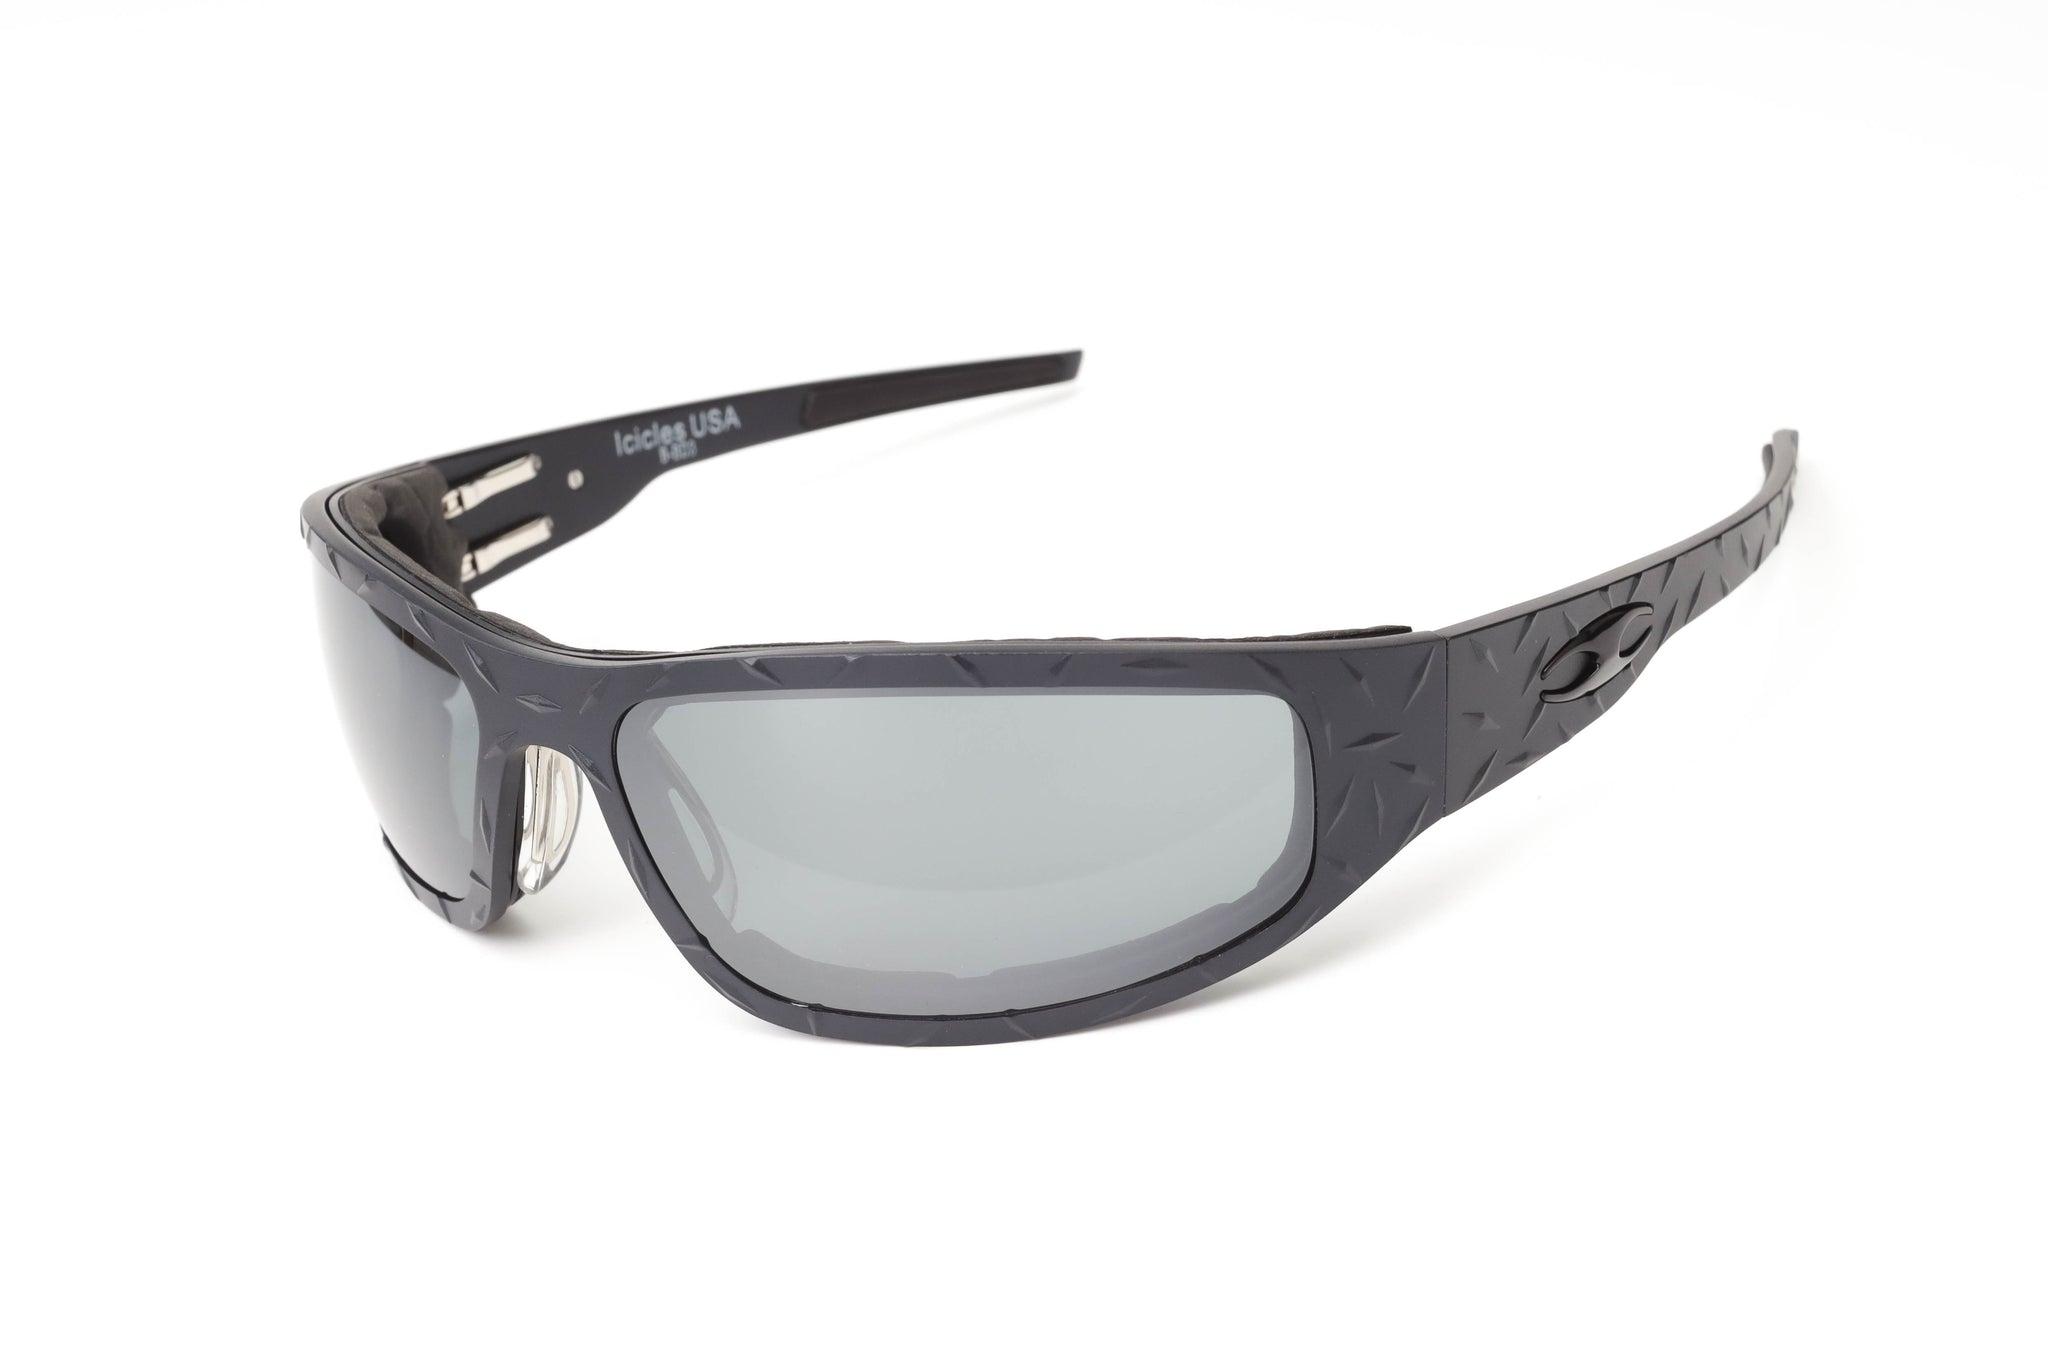 Father's Day Gift Ideas: Guideline Eyegear Polarized Sunglasses For Men